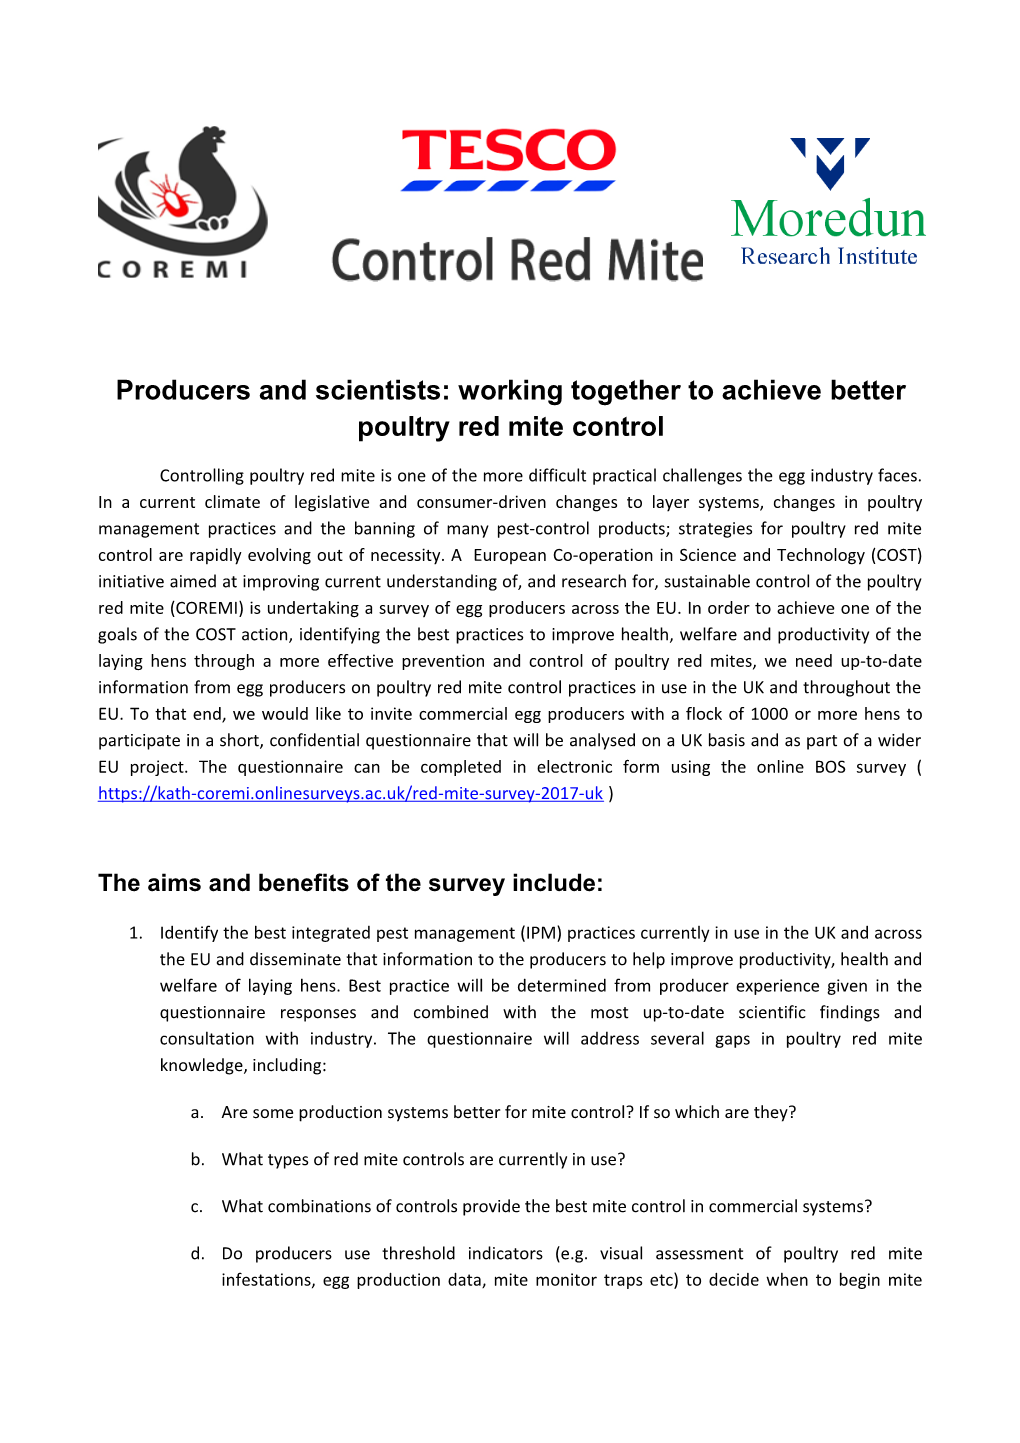 Producers and Scientists: Working Together to Achieve Better Poultry Red Mite Control